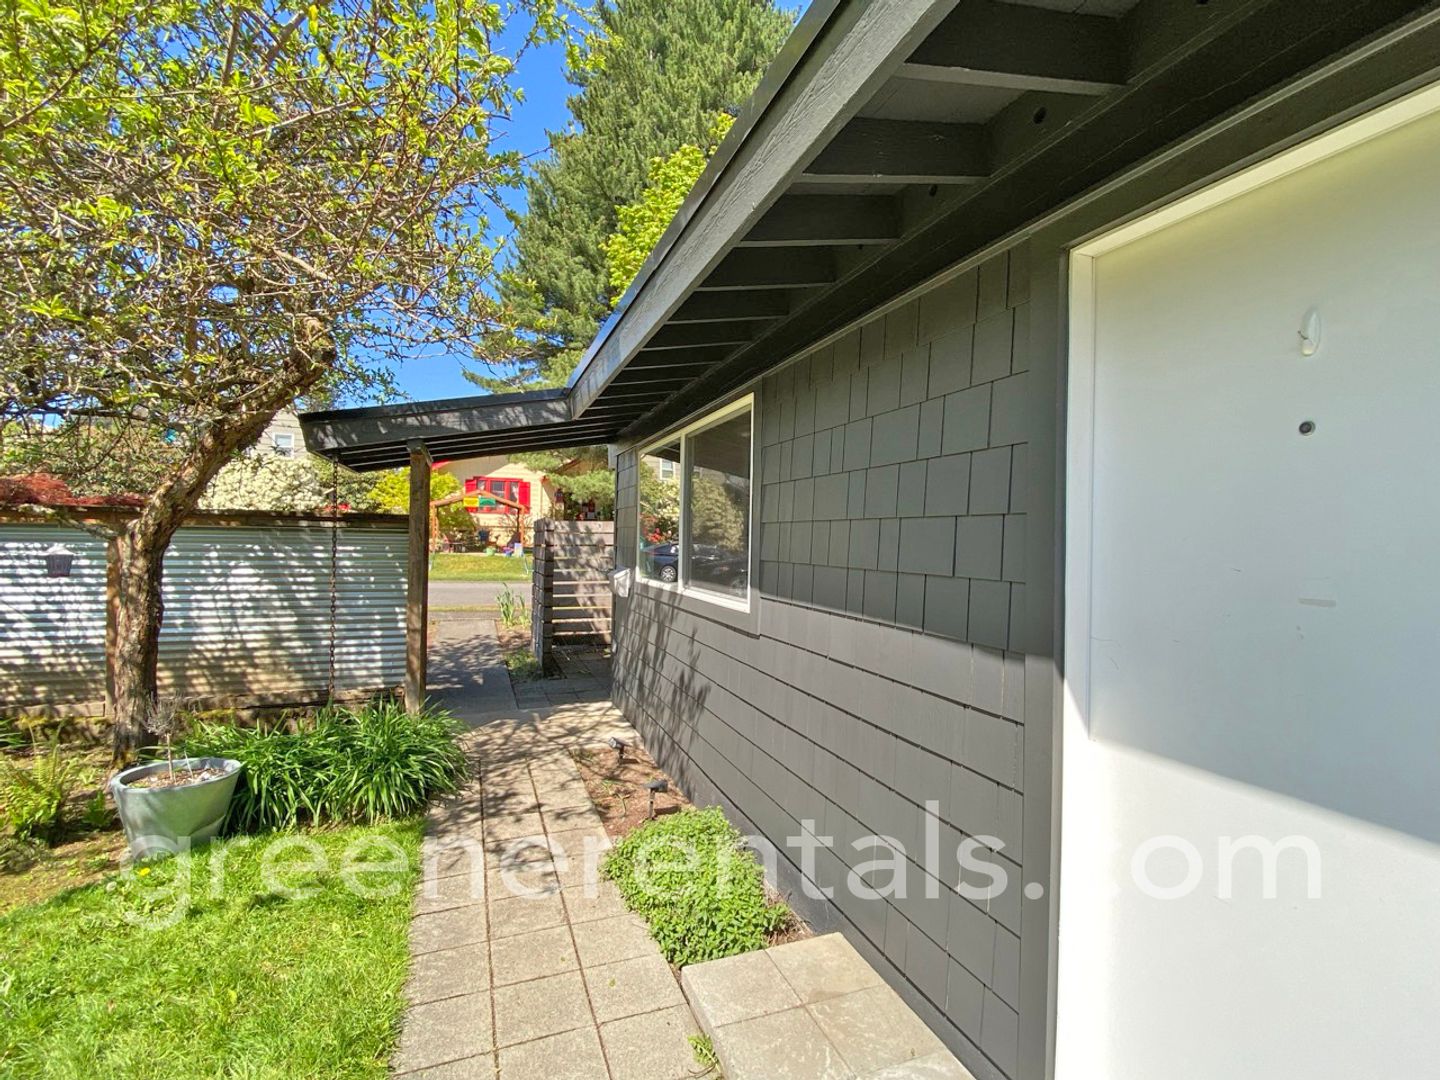 2BR 1BA West Olympia Home